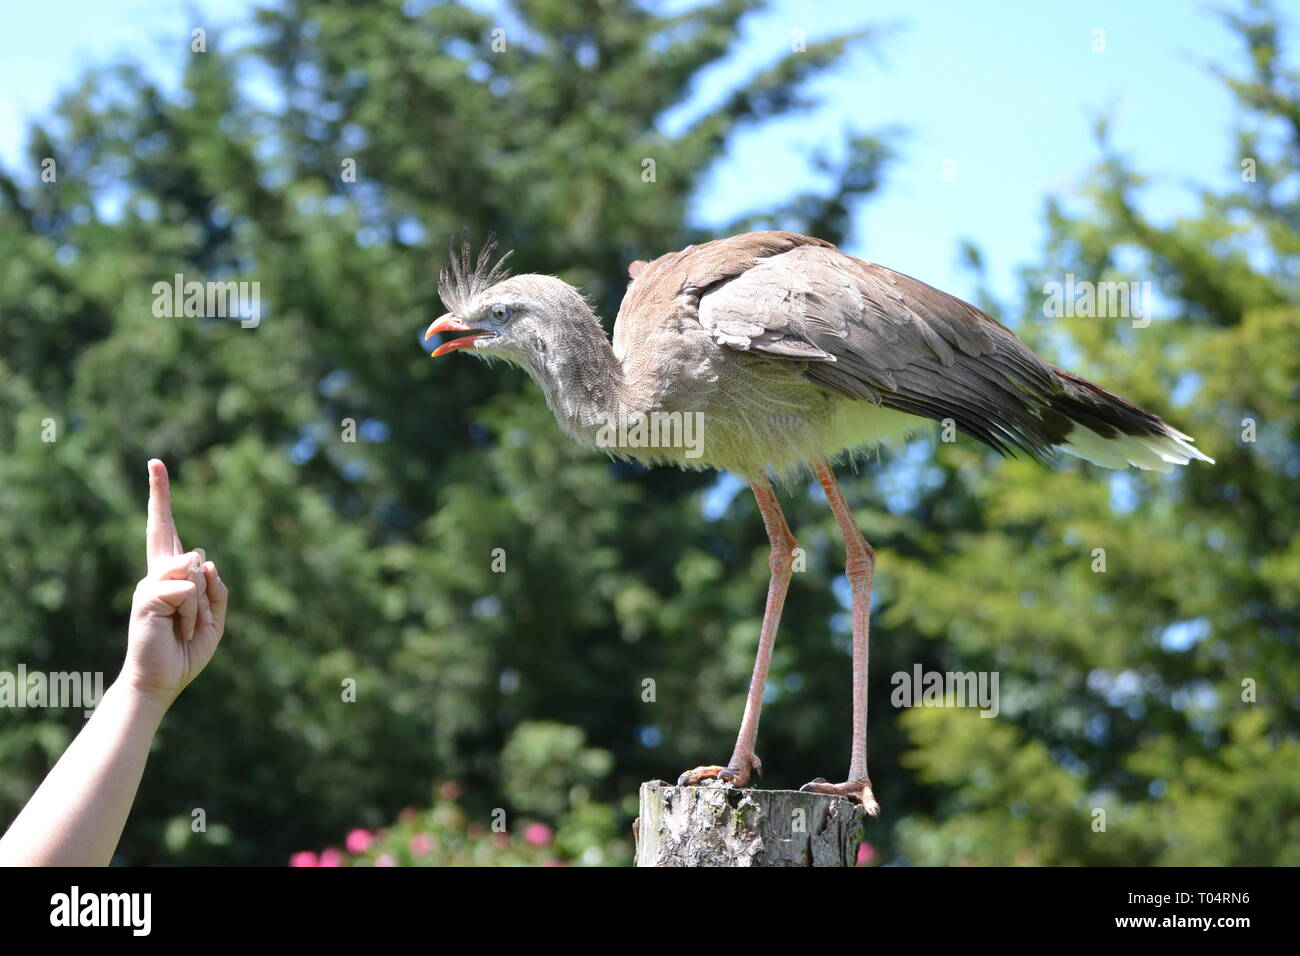 Red Legged Serima at Tropical Wings Zoo, Chelmsford, Essex, UK. This zoo closed in December 2017. Stock Photo